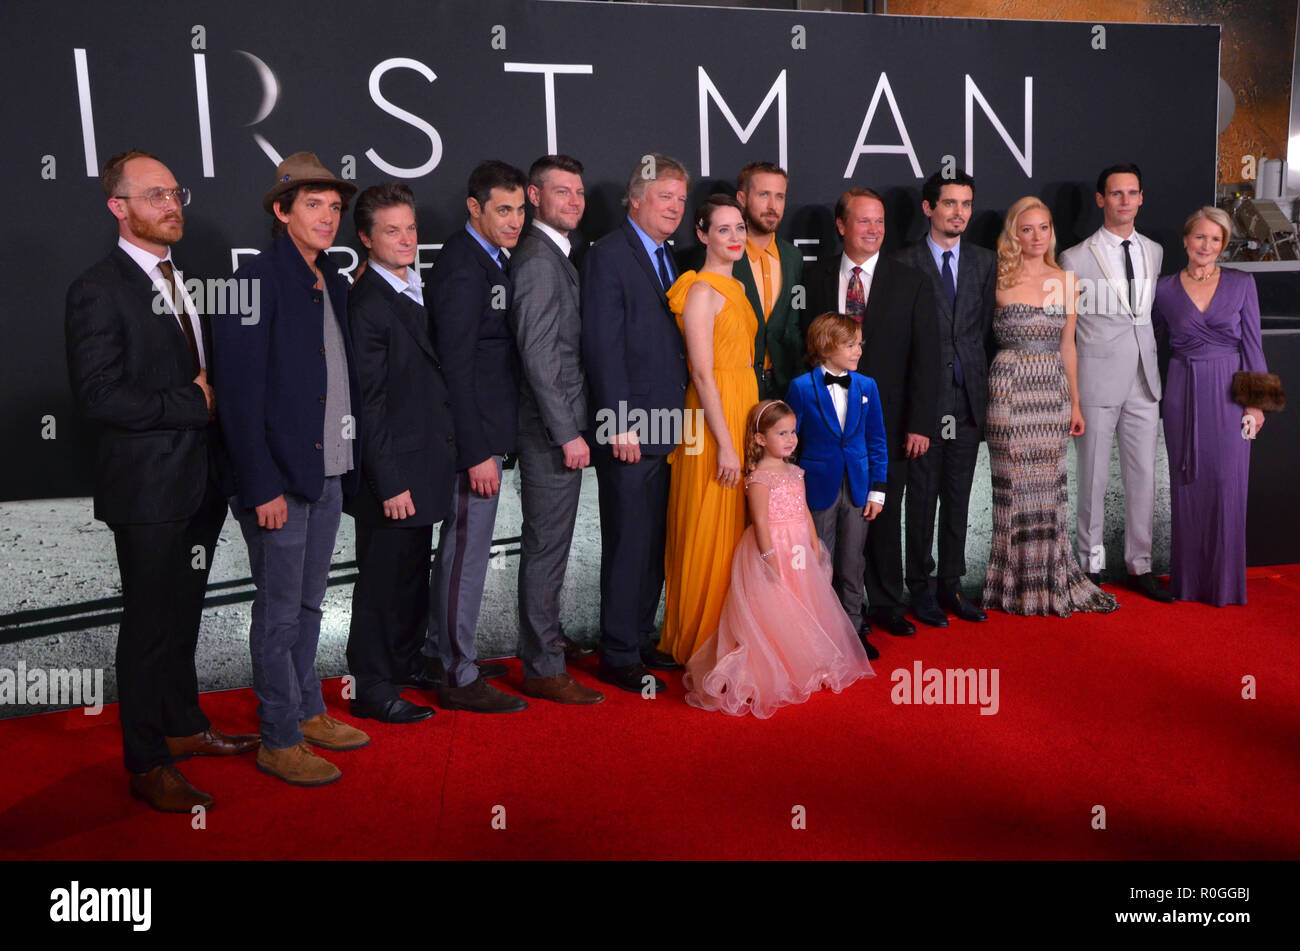 'First Man' Premiere - Arrivals  Featuring: Lukas Haas, Patrick Fugit, Josh Singer, Claire Foy, Ryan Gosling, Damien Chazelle Where: Washington DC, District Of Columbia, United States When: 04 Oct 2018 Credit: WENN.com Stock Photo